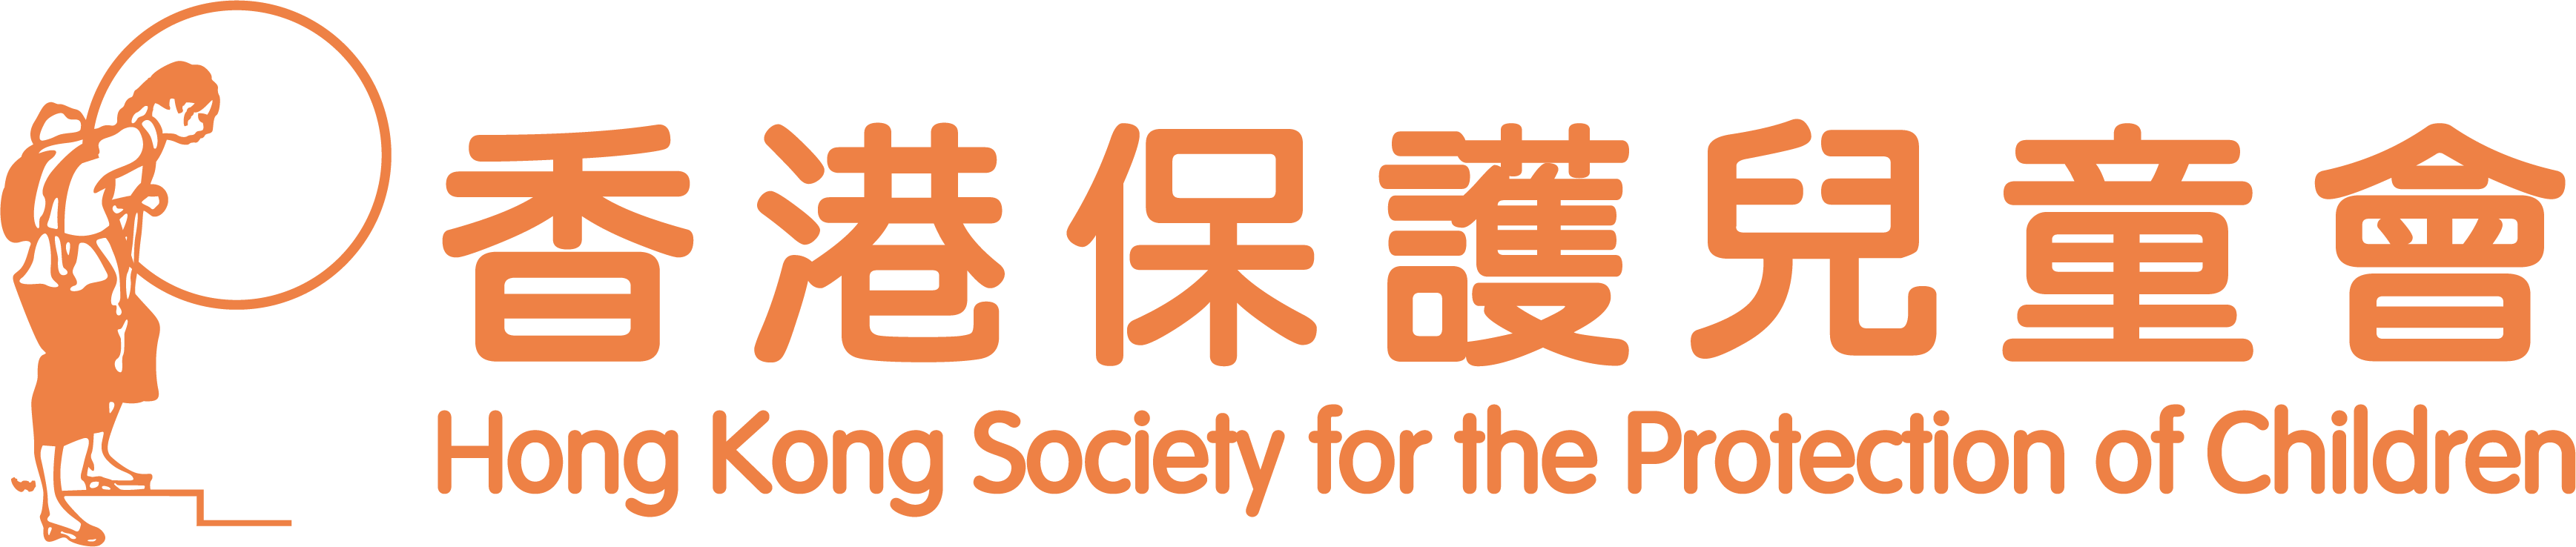 Hong Kong Society for the Protection of Children 香港保護兒童會